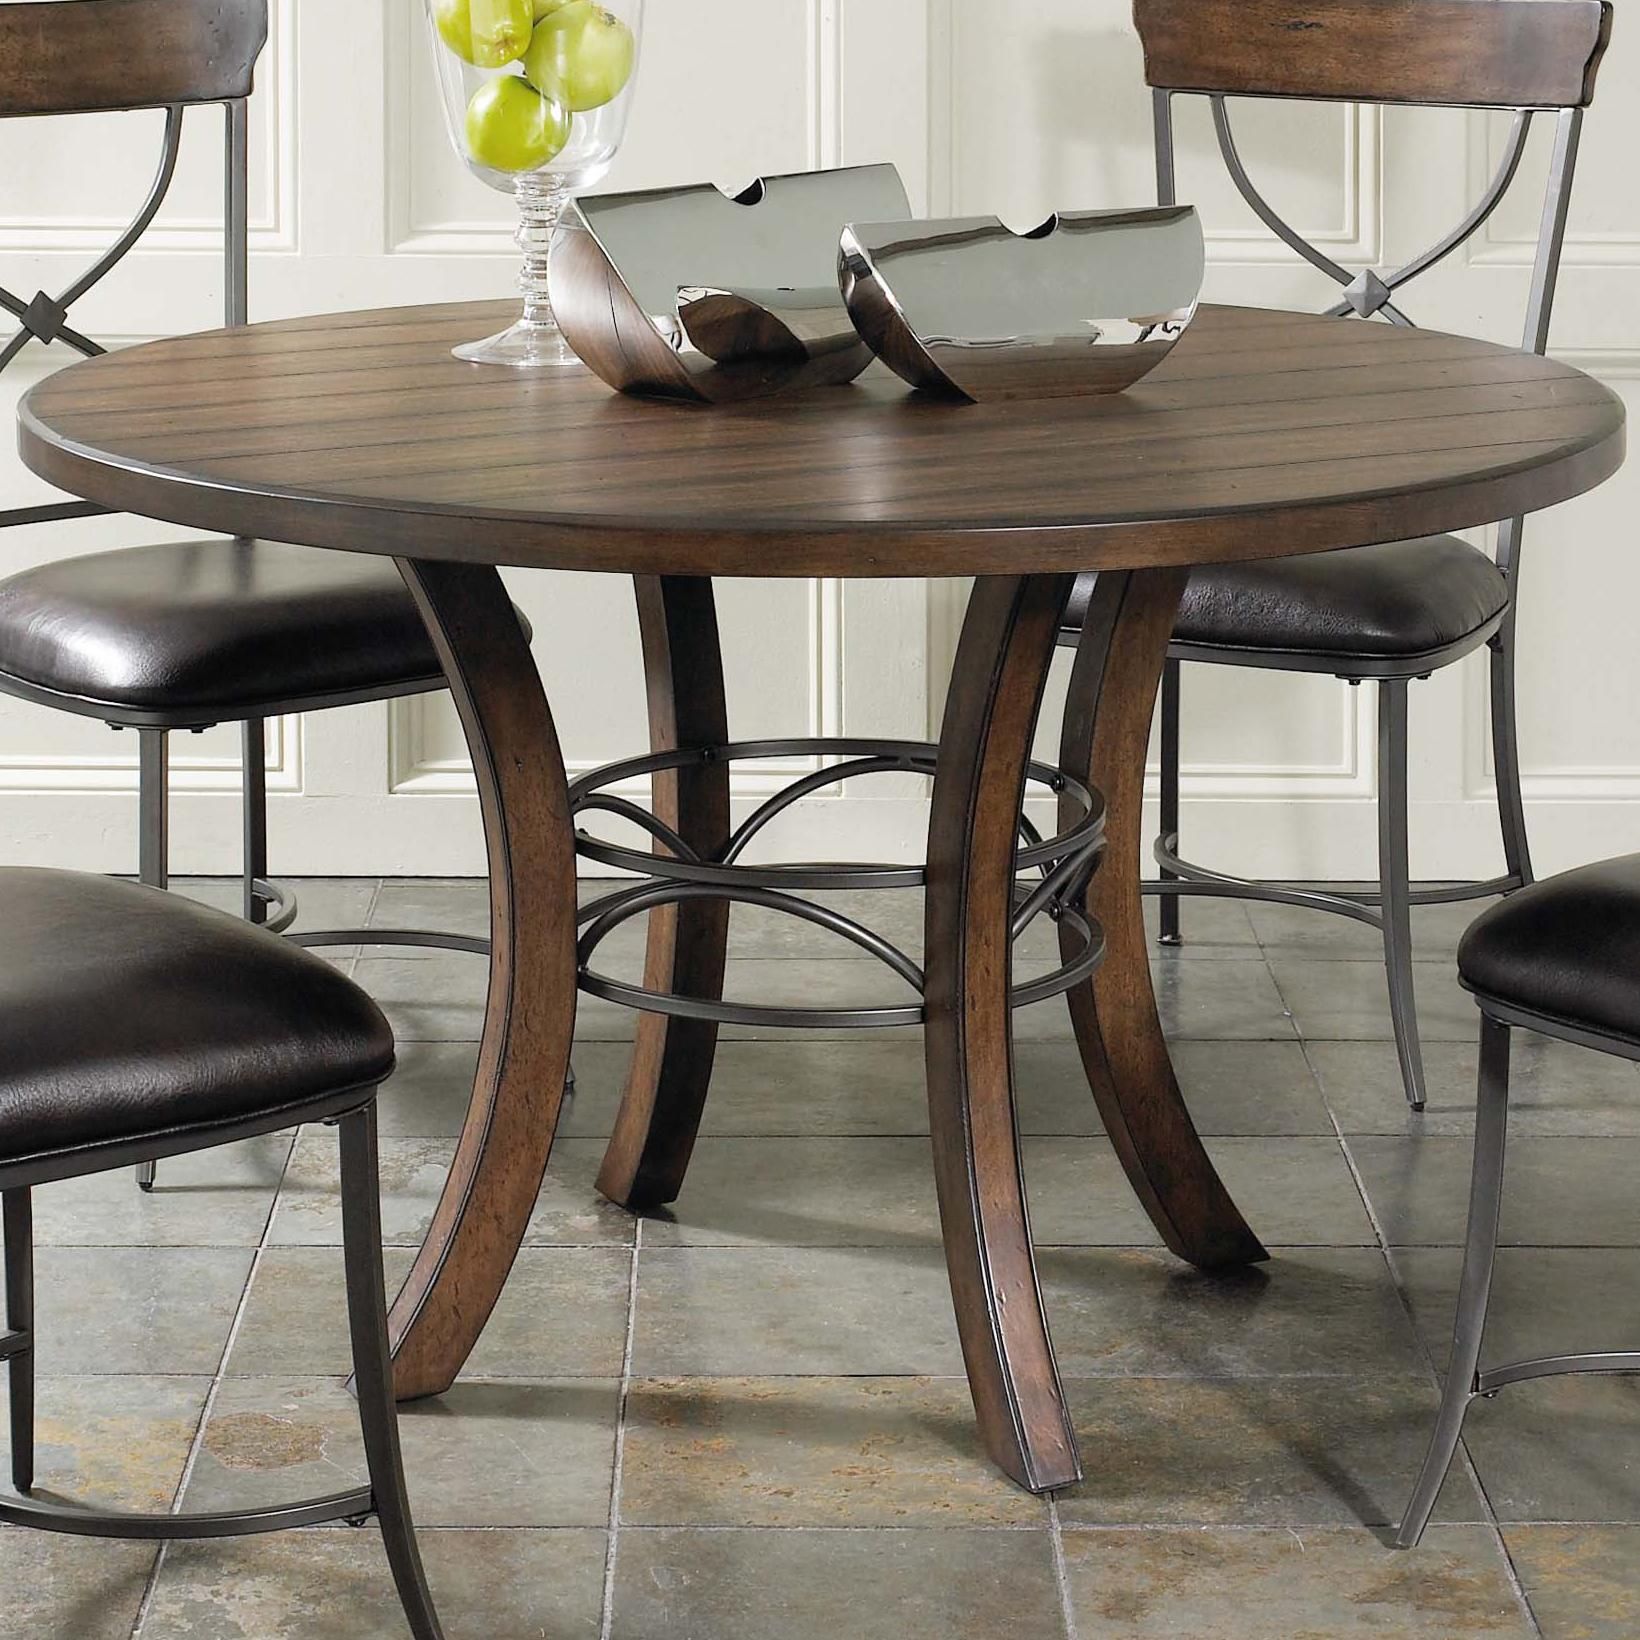 Round Wood Dining Table With Metal Acent Basehillsdale Intended For Most Current Reclaimed Teak And Cast Iron Round Dining Tables (View 11 of 15)